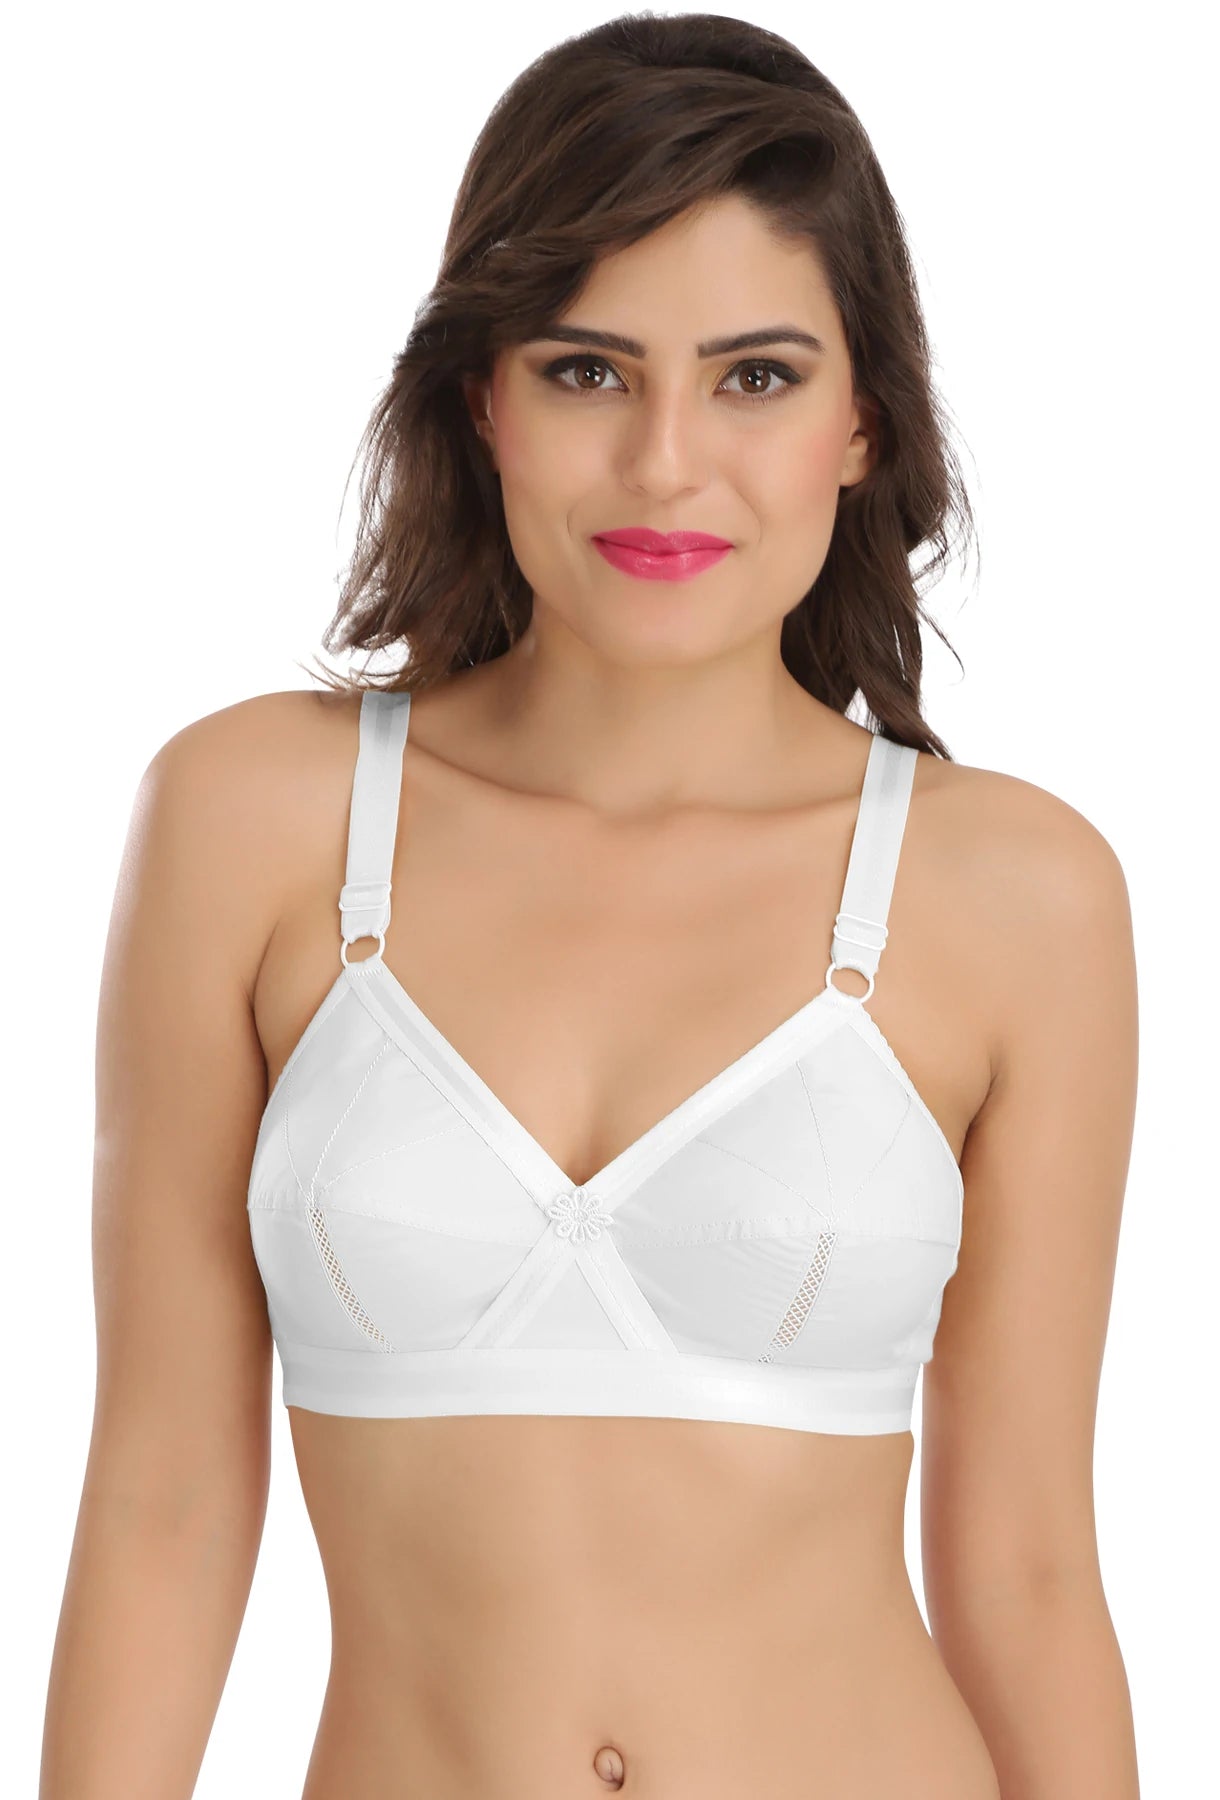 Buy Soft Beauty Bra by SS Enterprises  Women's Perfecto Plus Size Soft  Cotton Full Cup Everyday Non-Padded Sona Bra Online In India At Discounted  Prices